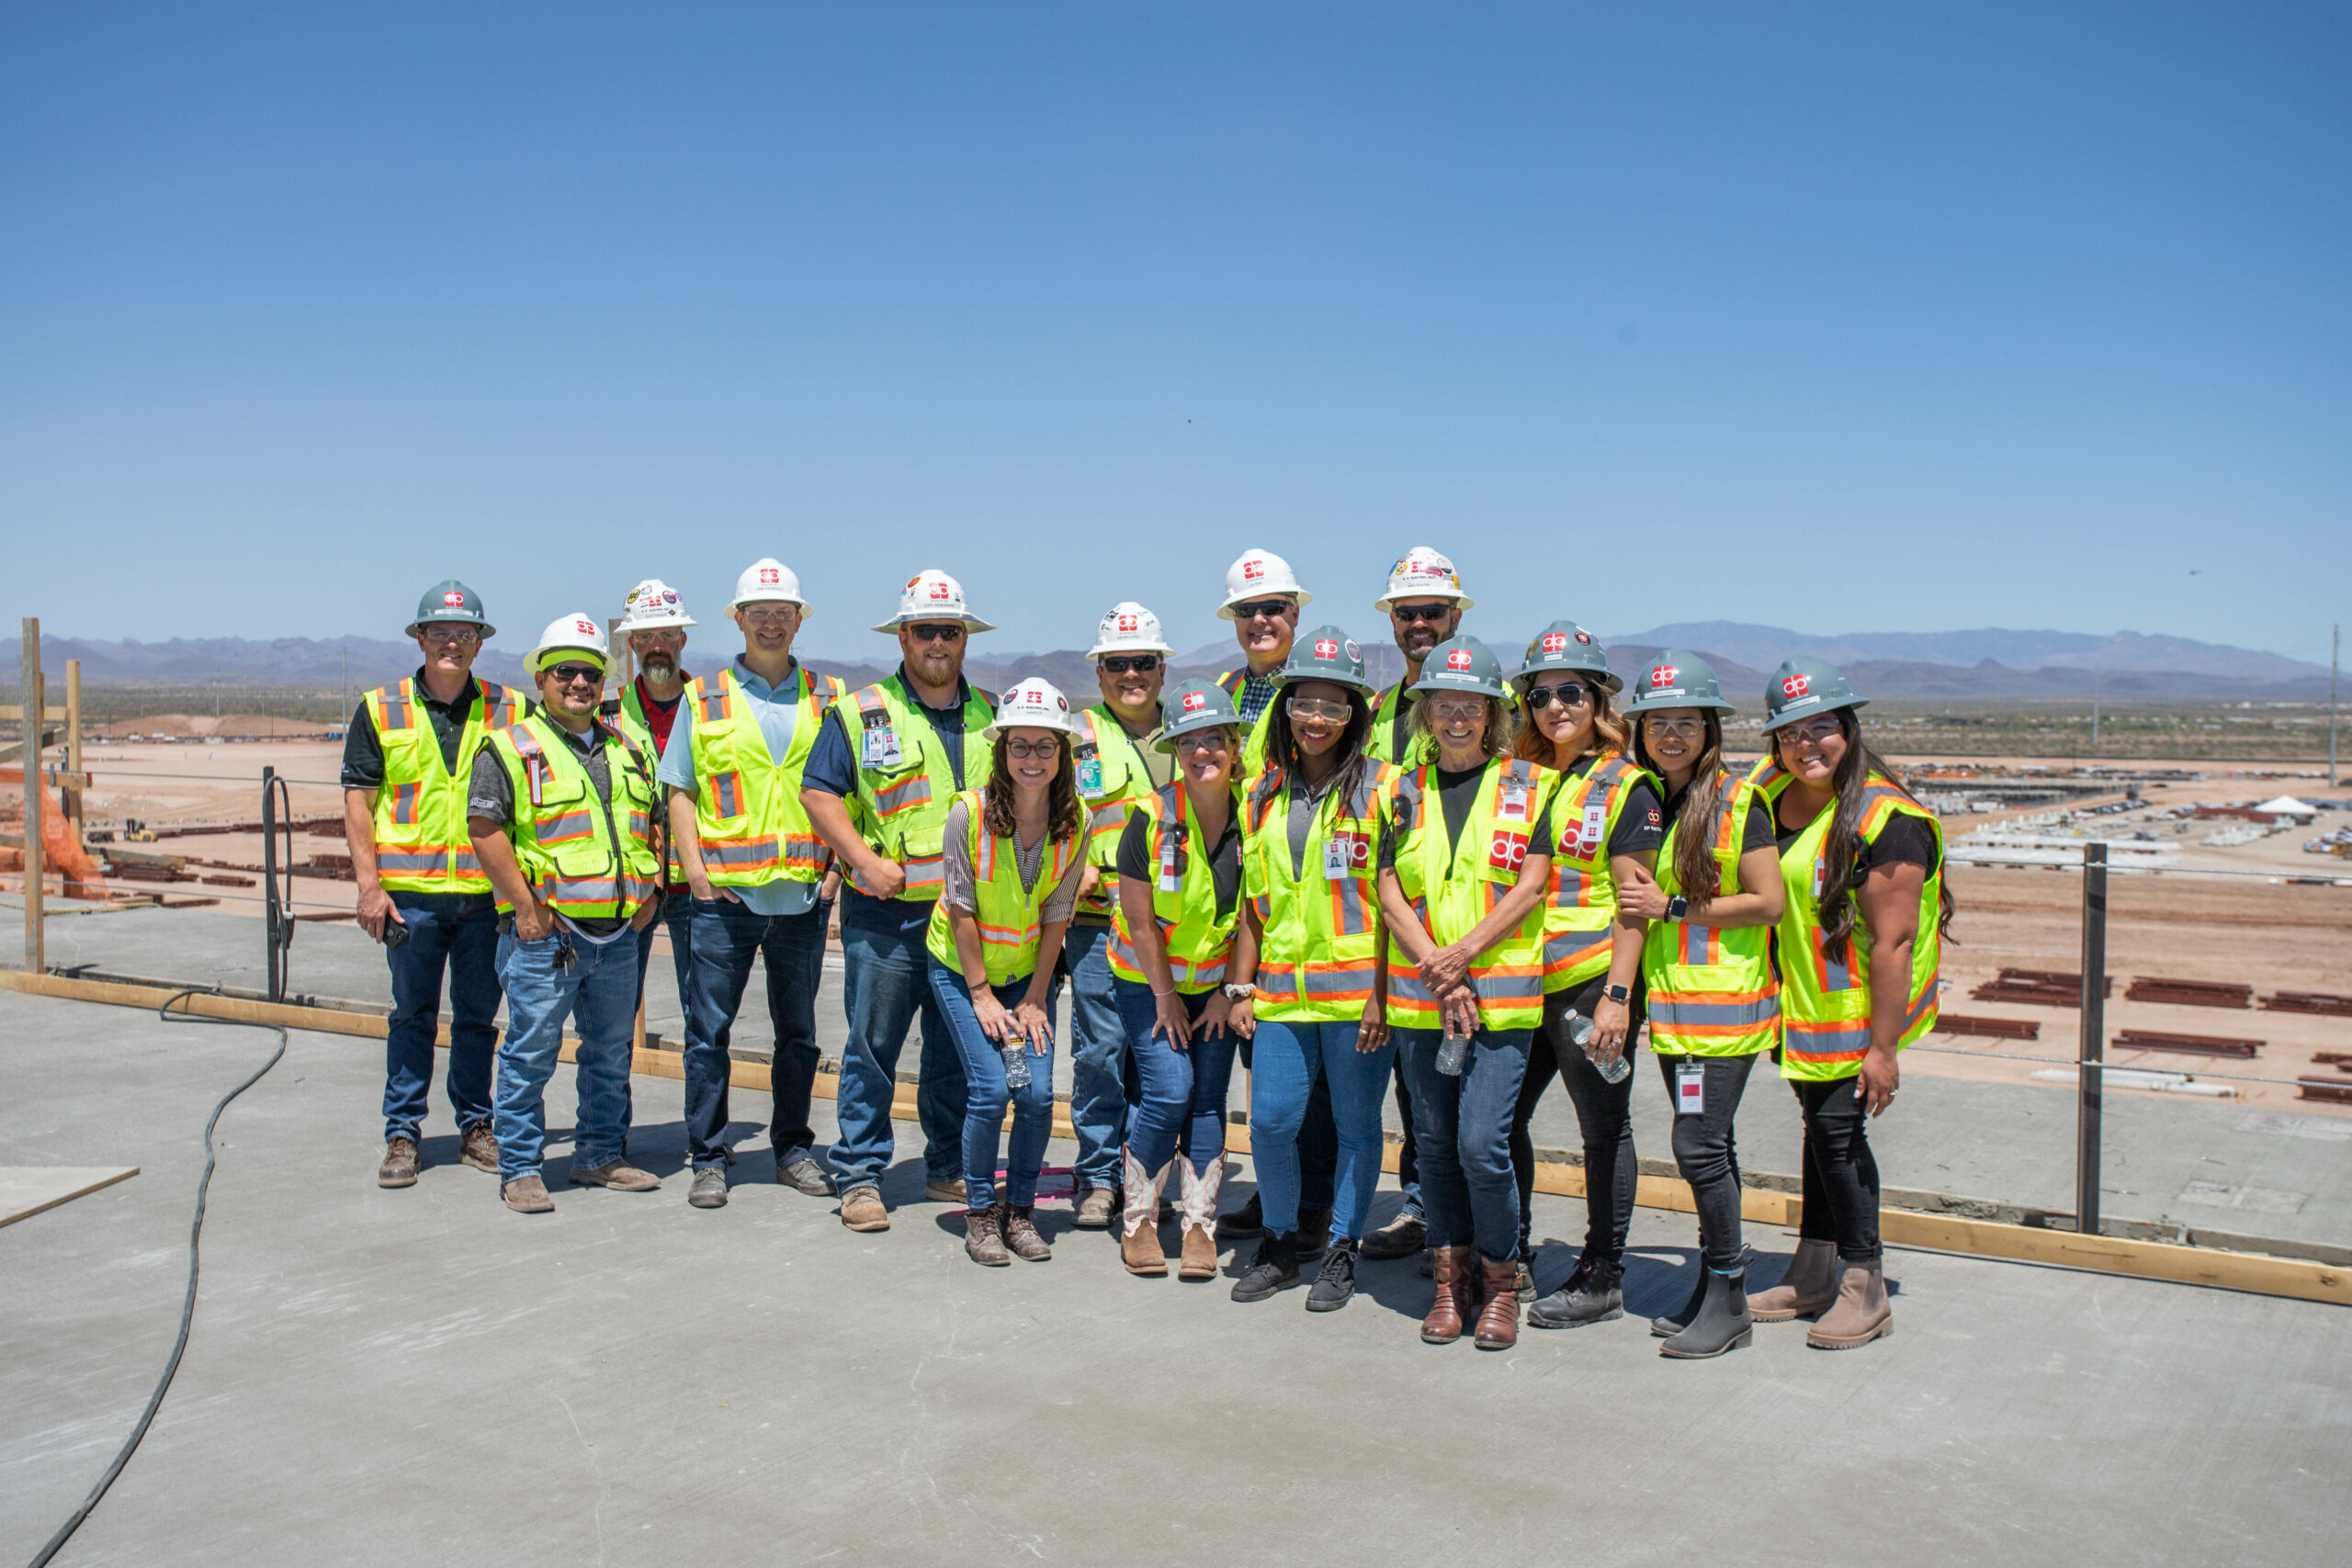 A group of construction workers posing for a photo, showcasing their careers.